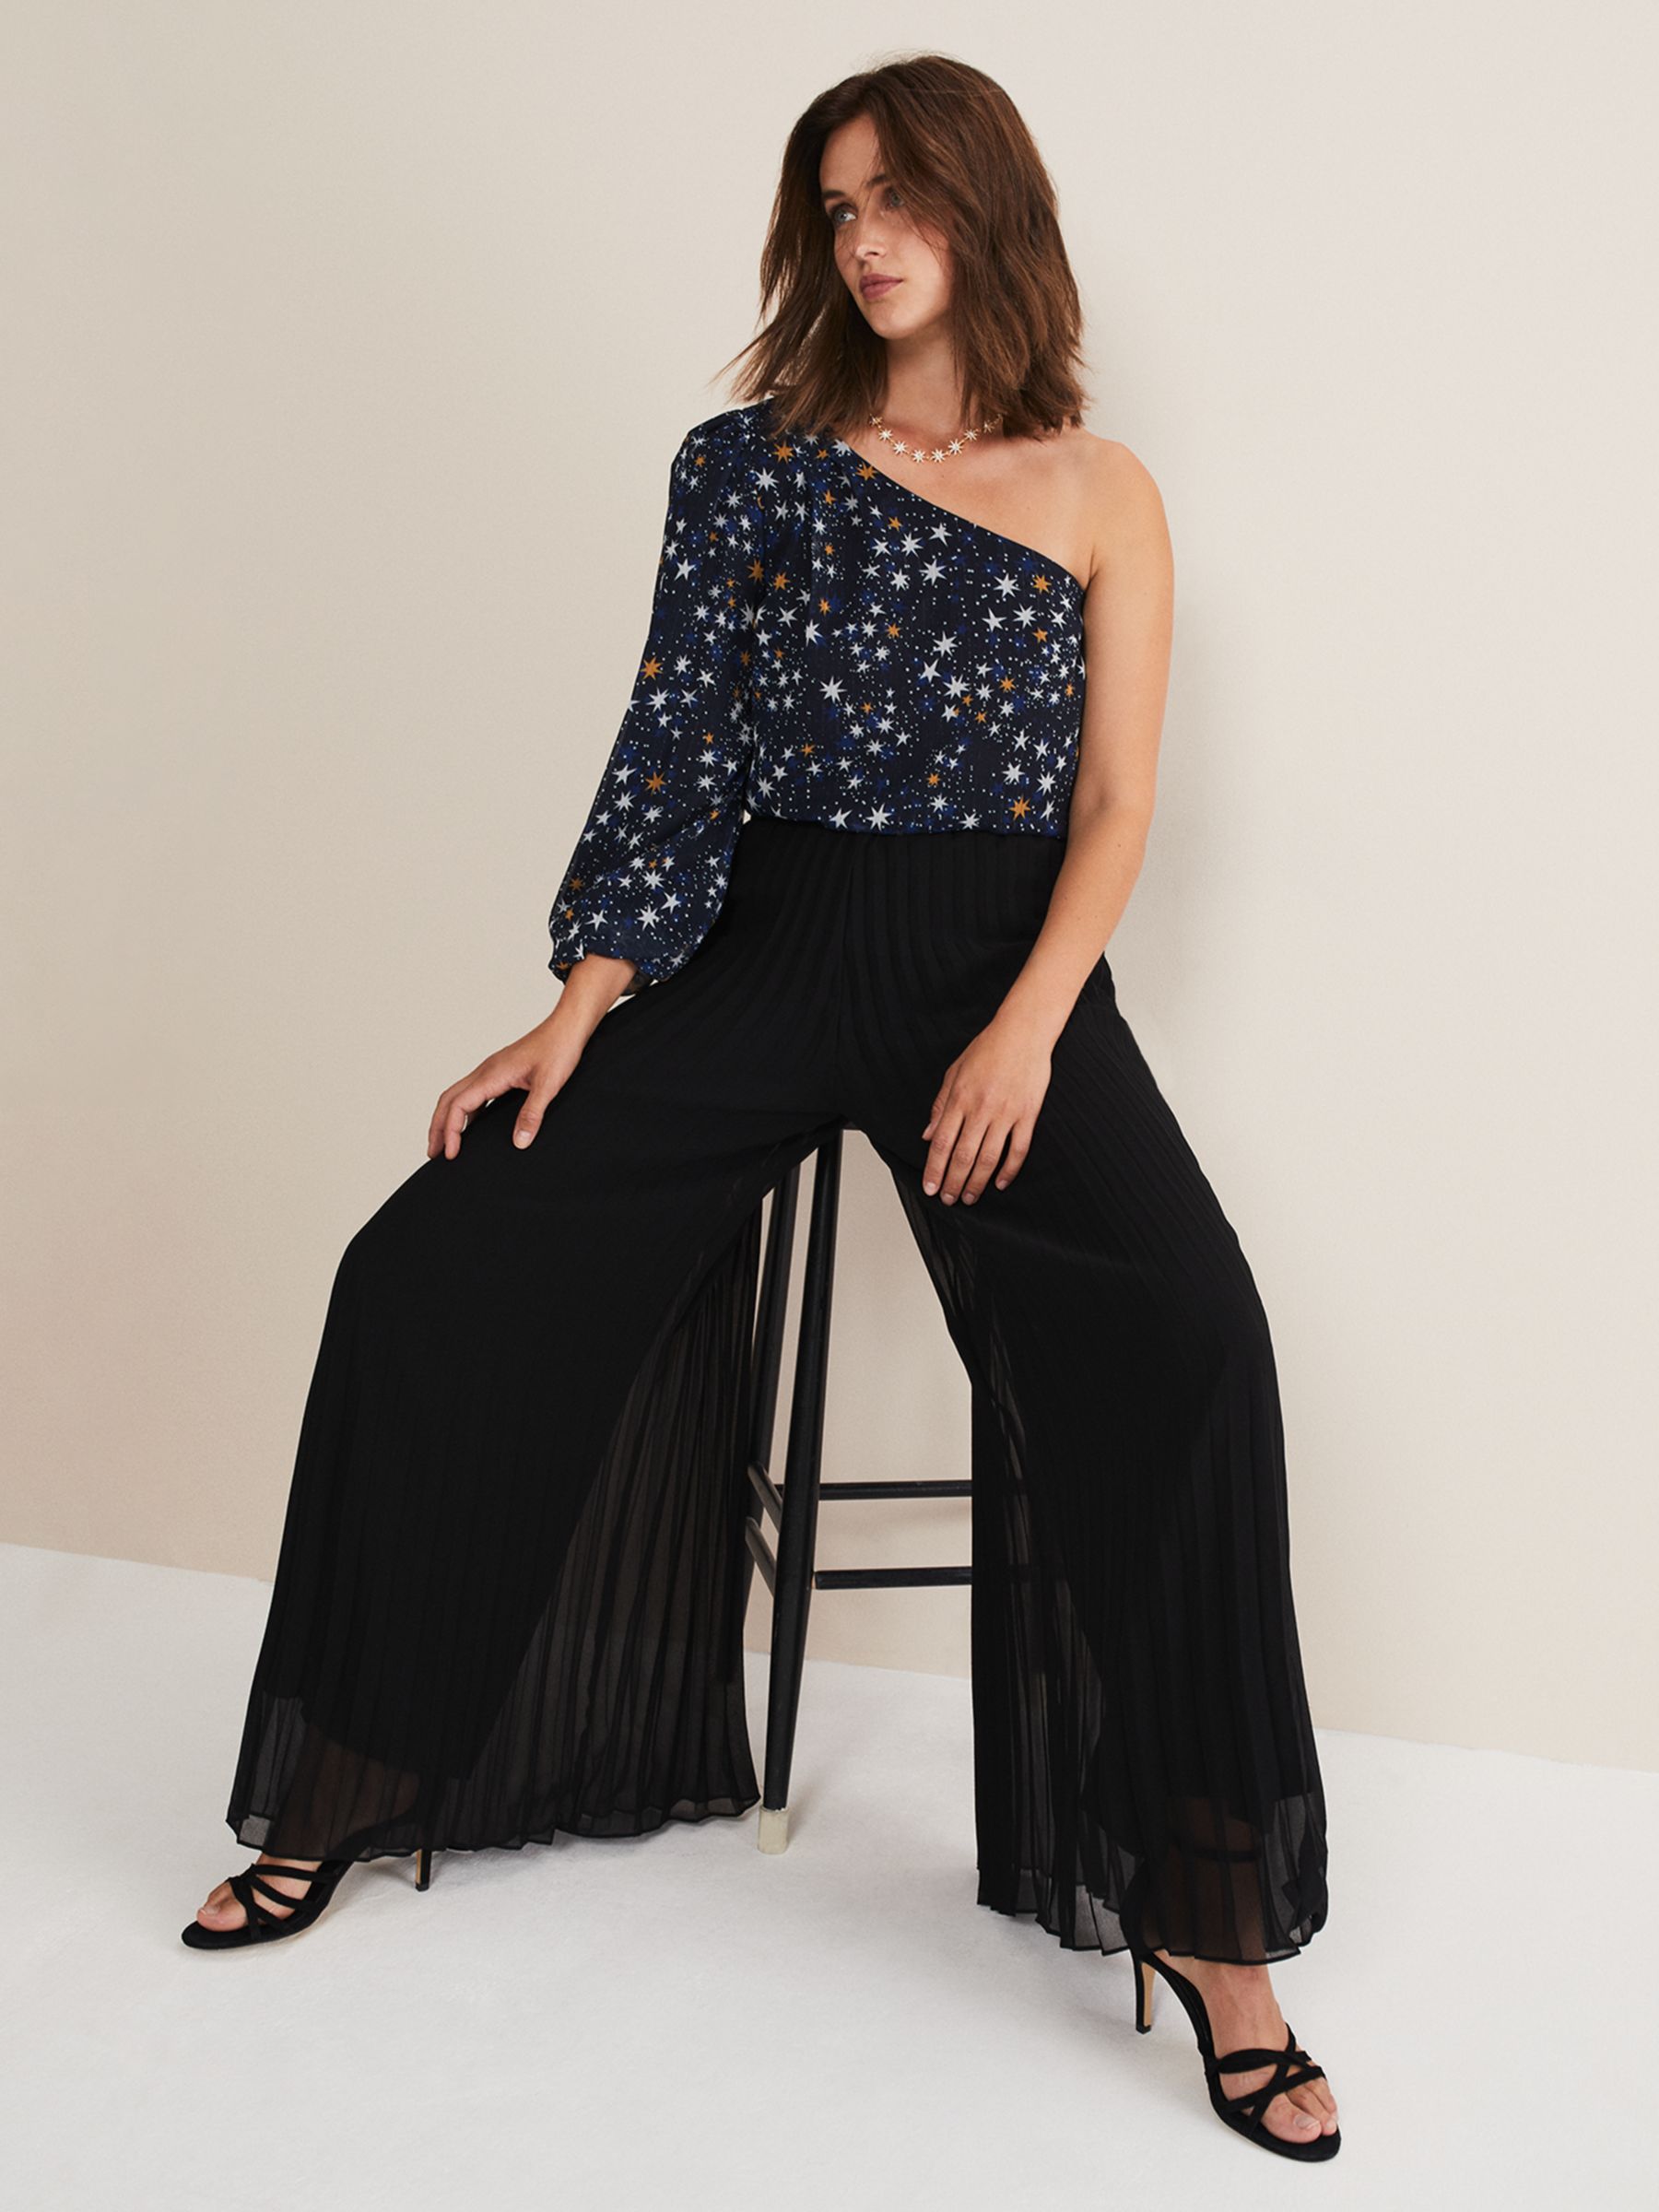 Phase Eight Sylvie Pleat Wide Leg Trousers, Black at John Lewis & Partners